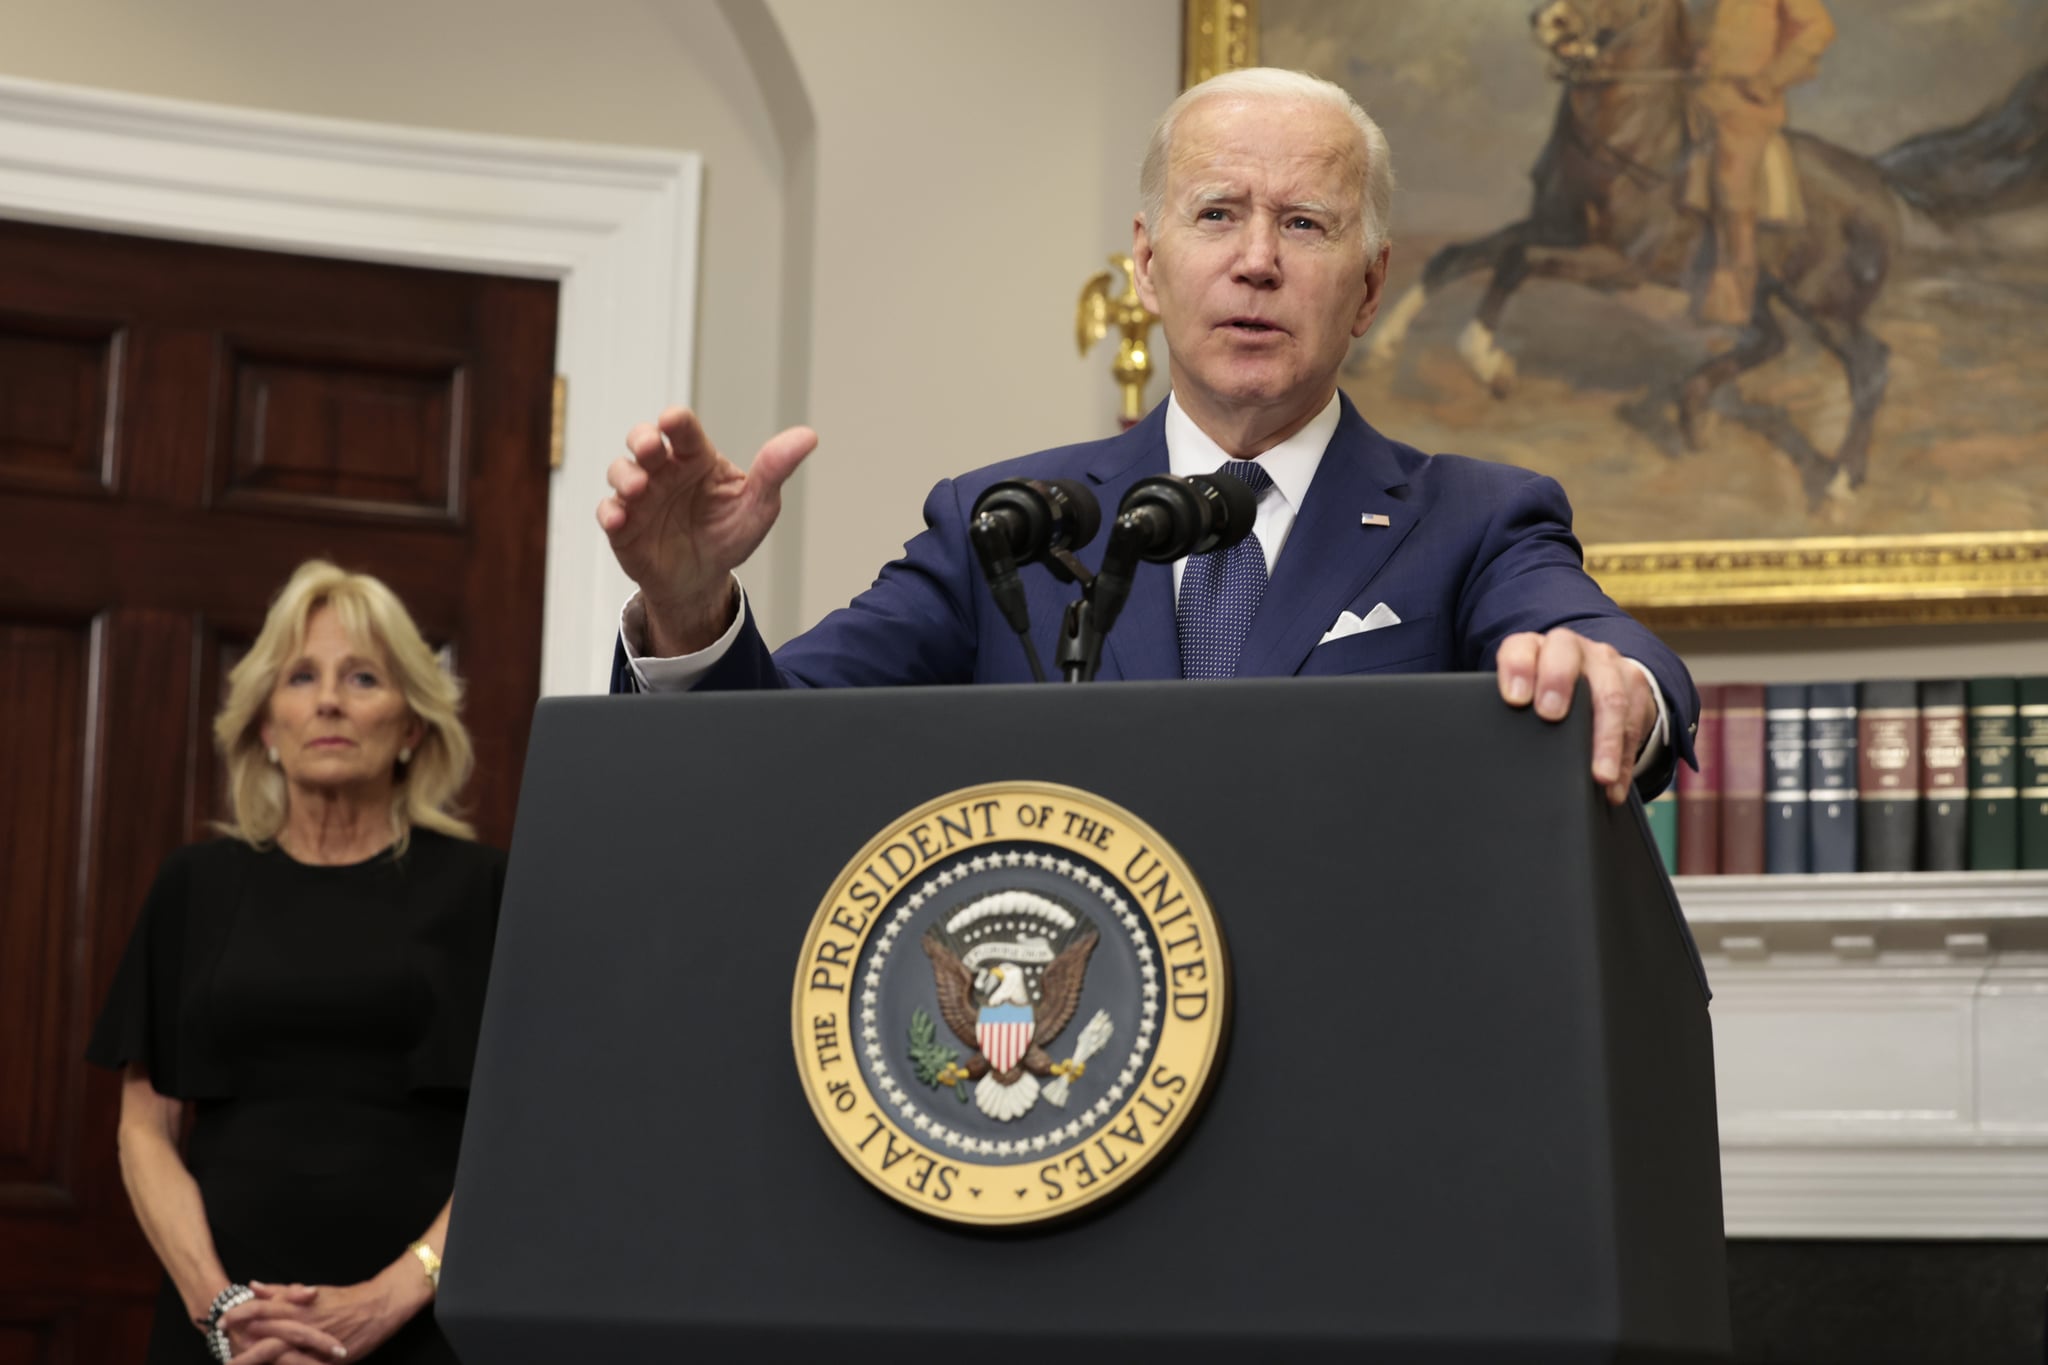 WASHINGTON, DC - MAY 24: US President Joe Biden delivers remarks from the Roosevelt Room of the White House as First Lady Jill Biden looks at the mass shooting at an elementary school in Texas on May 24, 2022 in Washington, DC.  Eighteen people were killed after a gunman opened fire today at Robb Elementary School in Ovaldi, Texas, according to published reports.  (Photo by Anna Moneymaker/Getty Images)